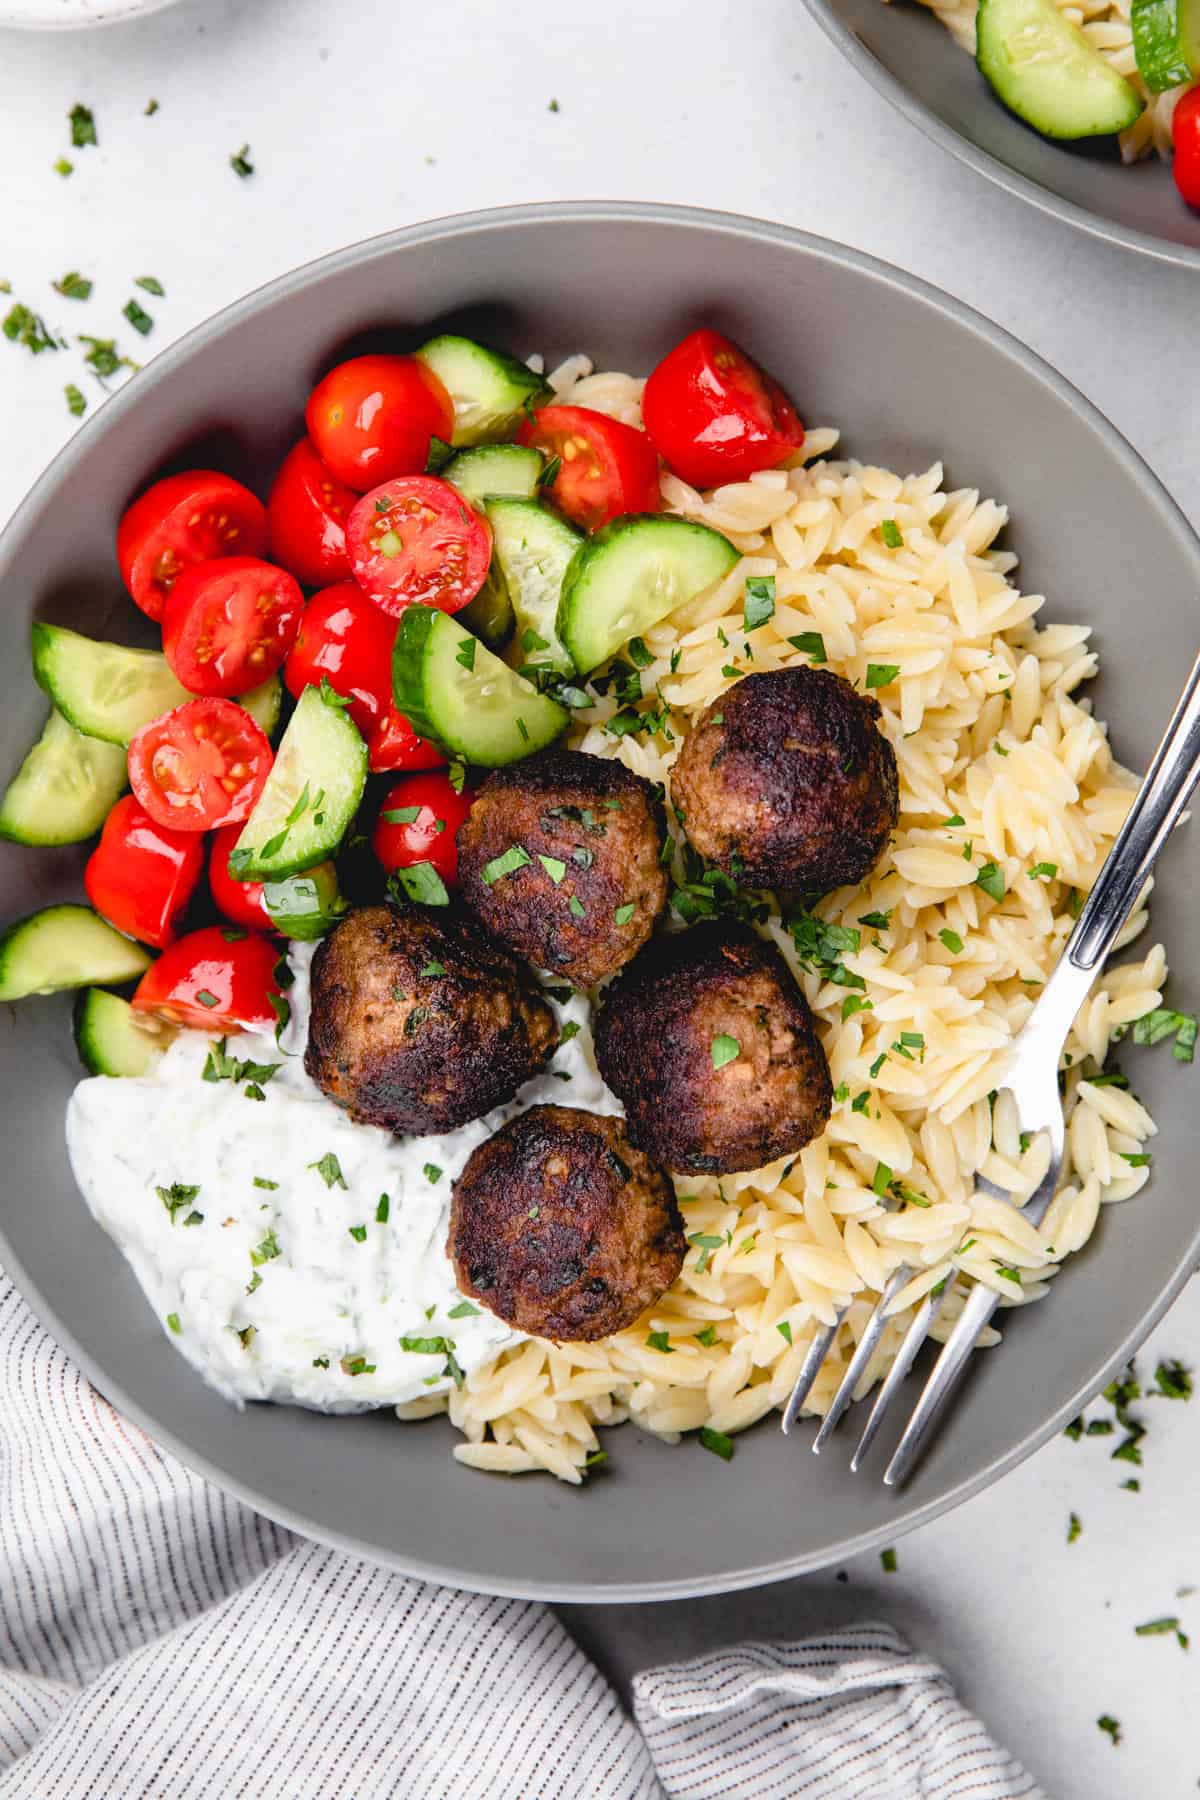 Greek meatballs with orzo, tzatziki sauce, and cherry cucumber salad in a grey bowl with a fork.